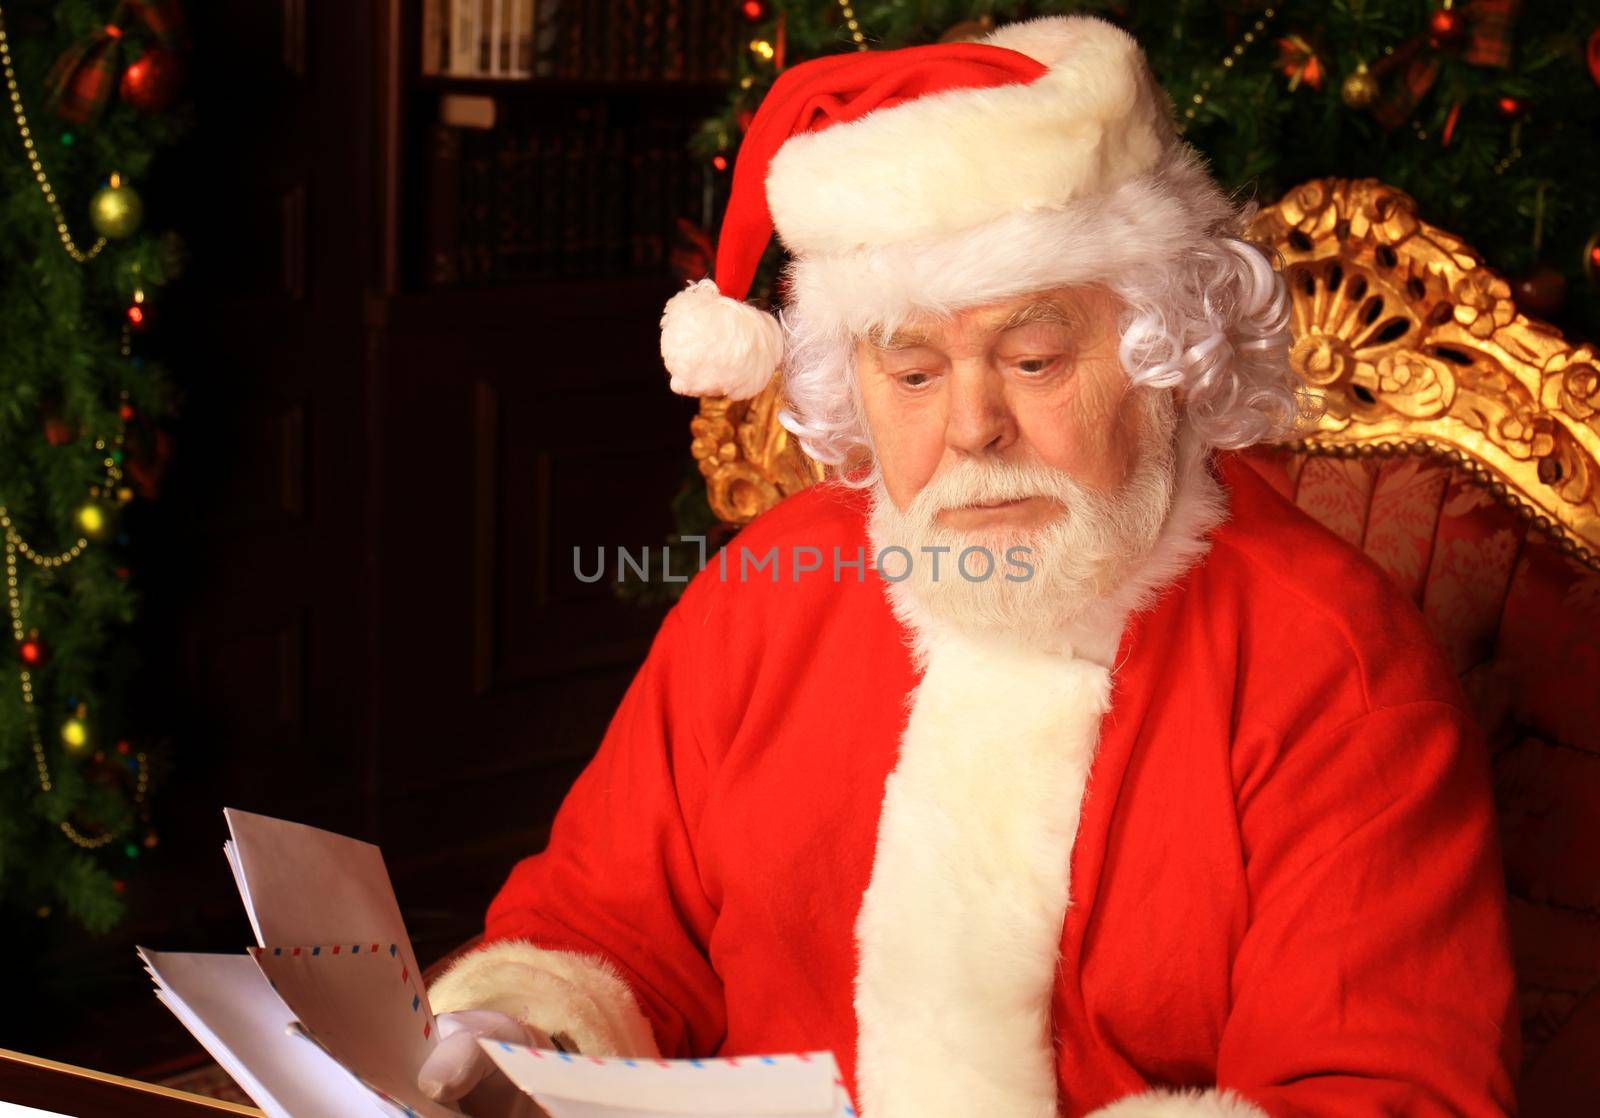 Santa sitting at the Christmas tree, holding Christmas letters and having a rest by the fireplace.